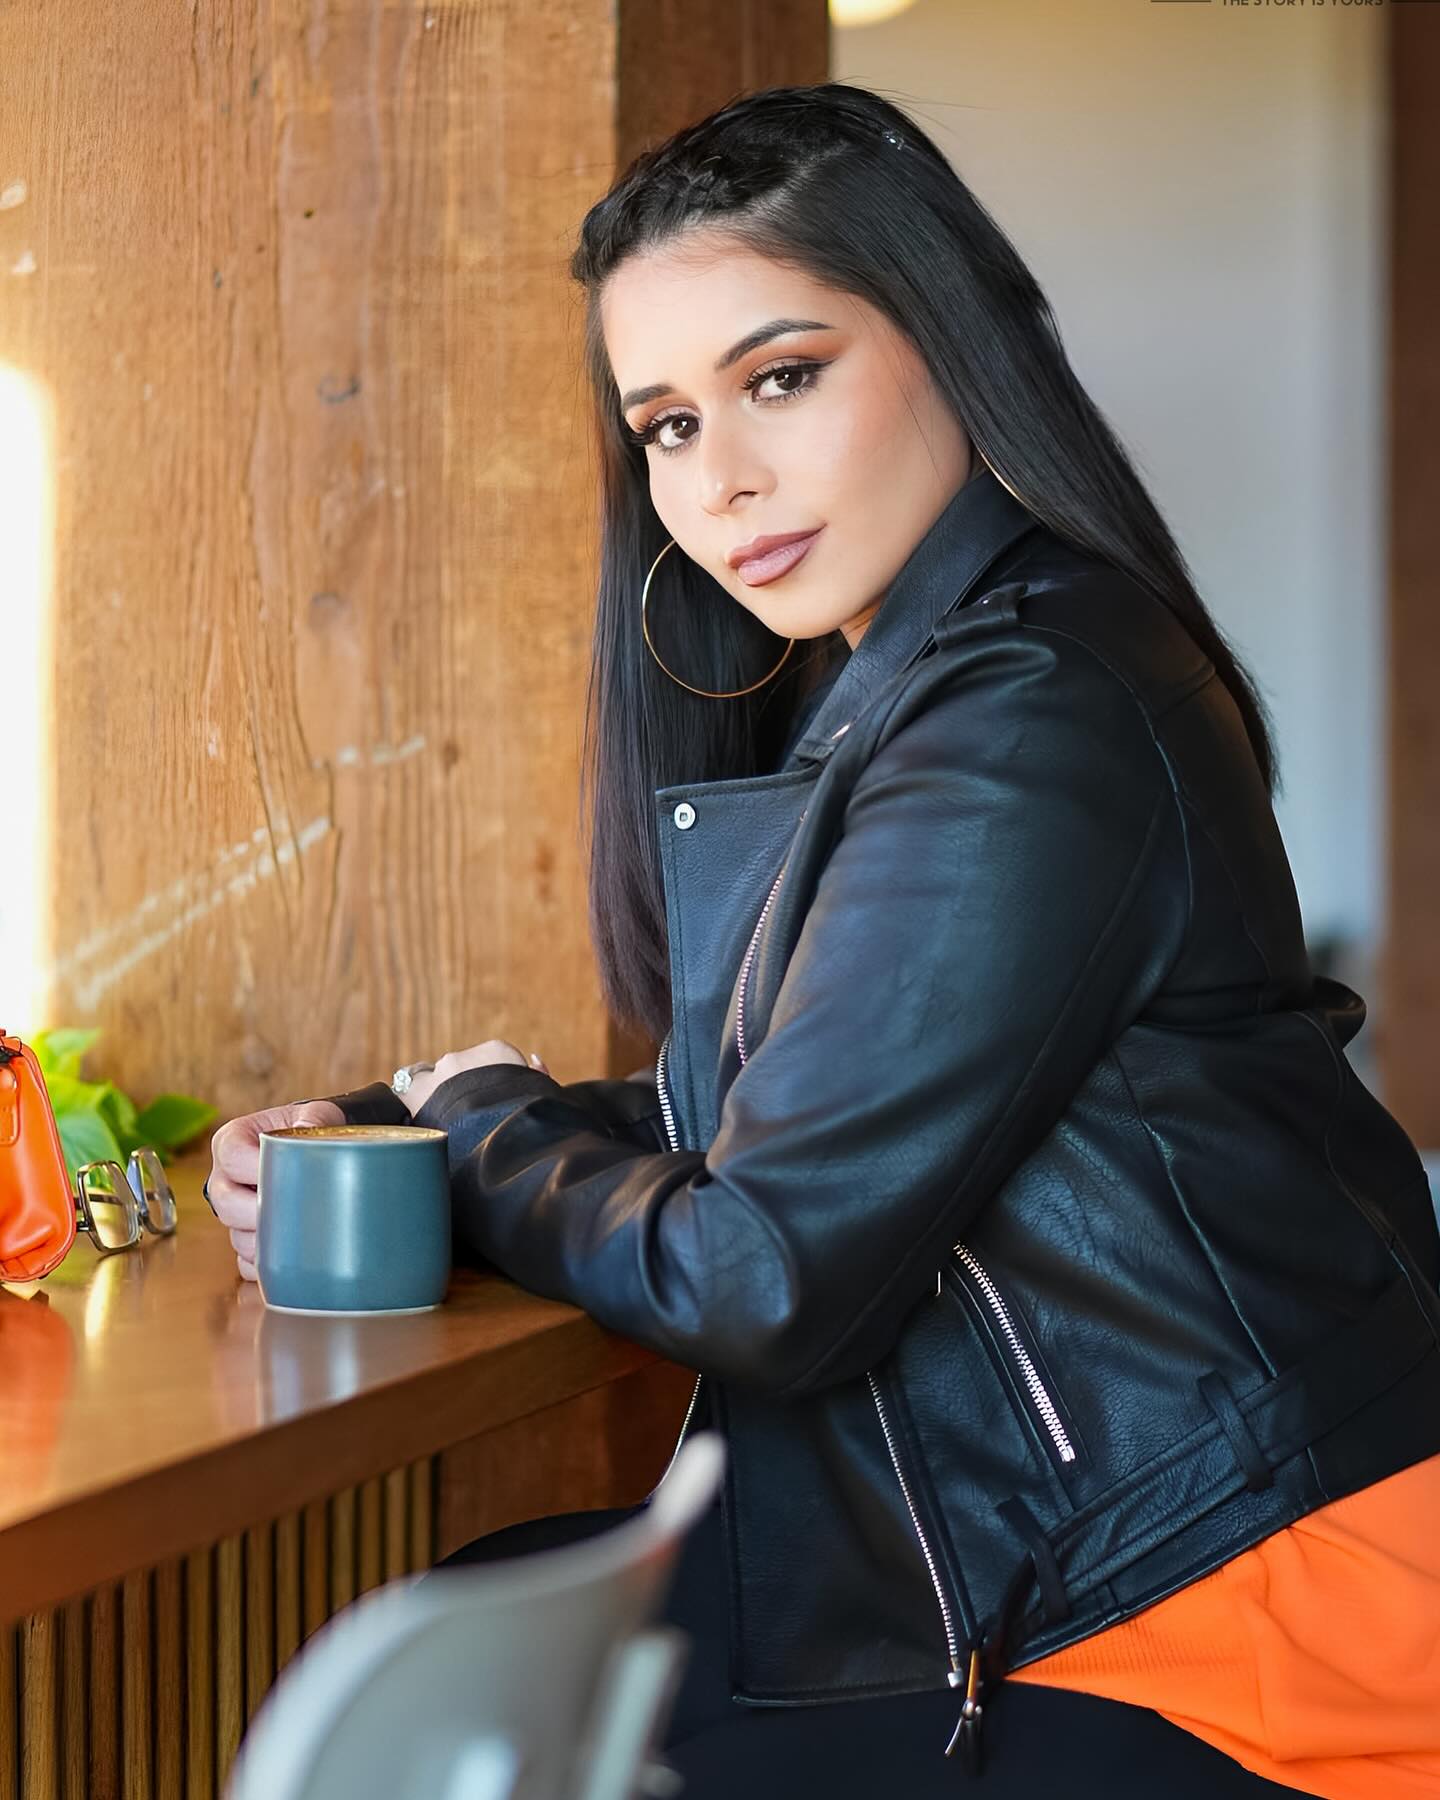 Make Sure You Go Check My New YouTube Video To See More About This Photoshoot .🫶☕️☺️
.
.
📸 @caspersedits ❤️
.
#coffee #portland #adventure #photoshoot #model #fashion